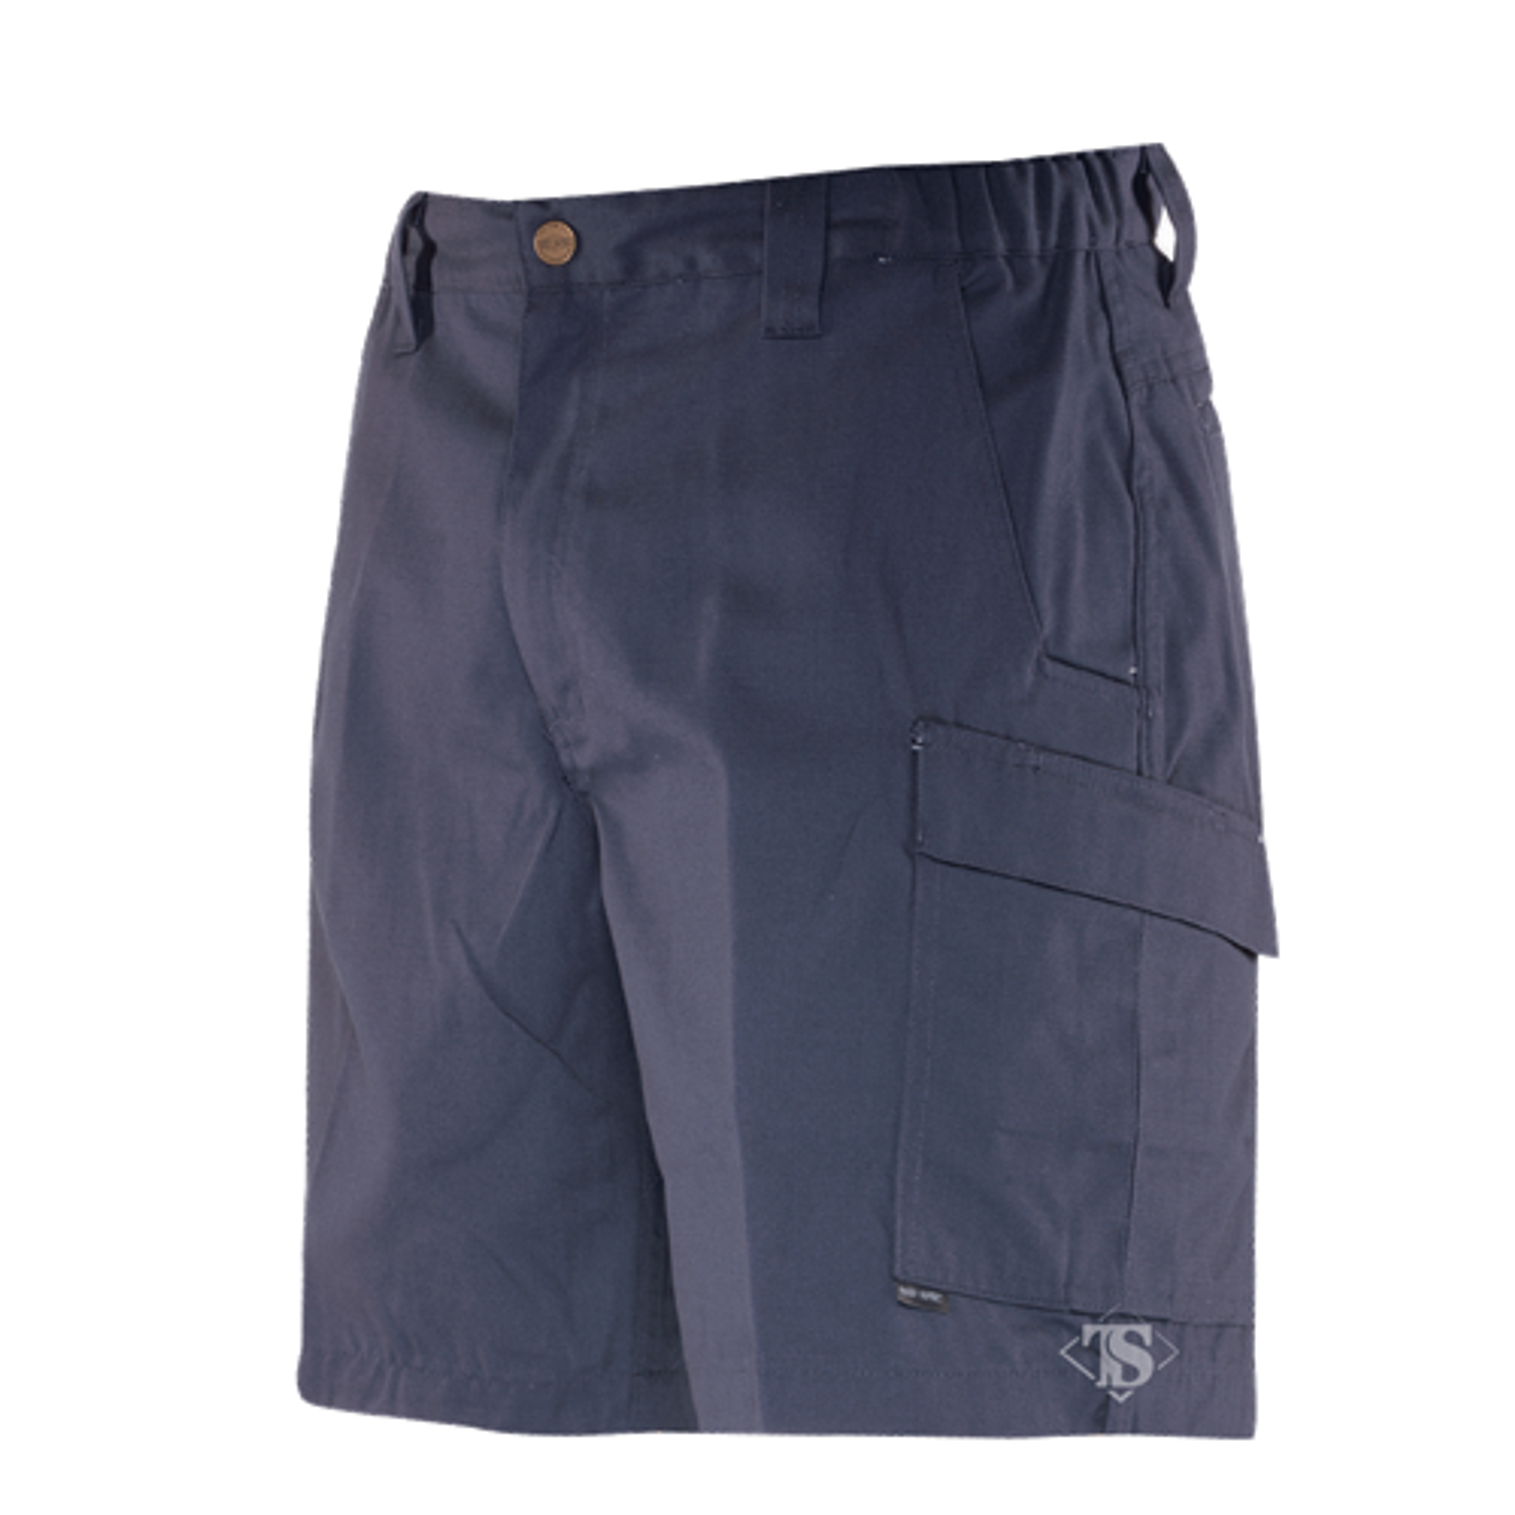 Simply Tactical Cargo Shorts - KRTSP-4232005